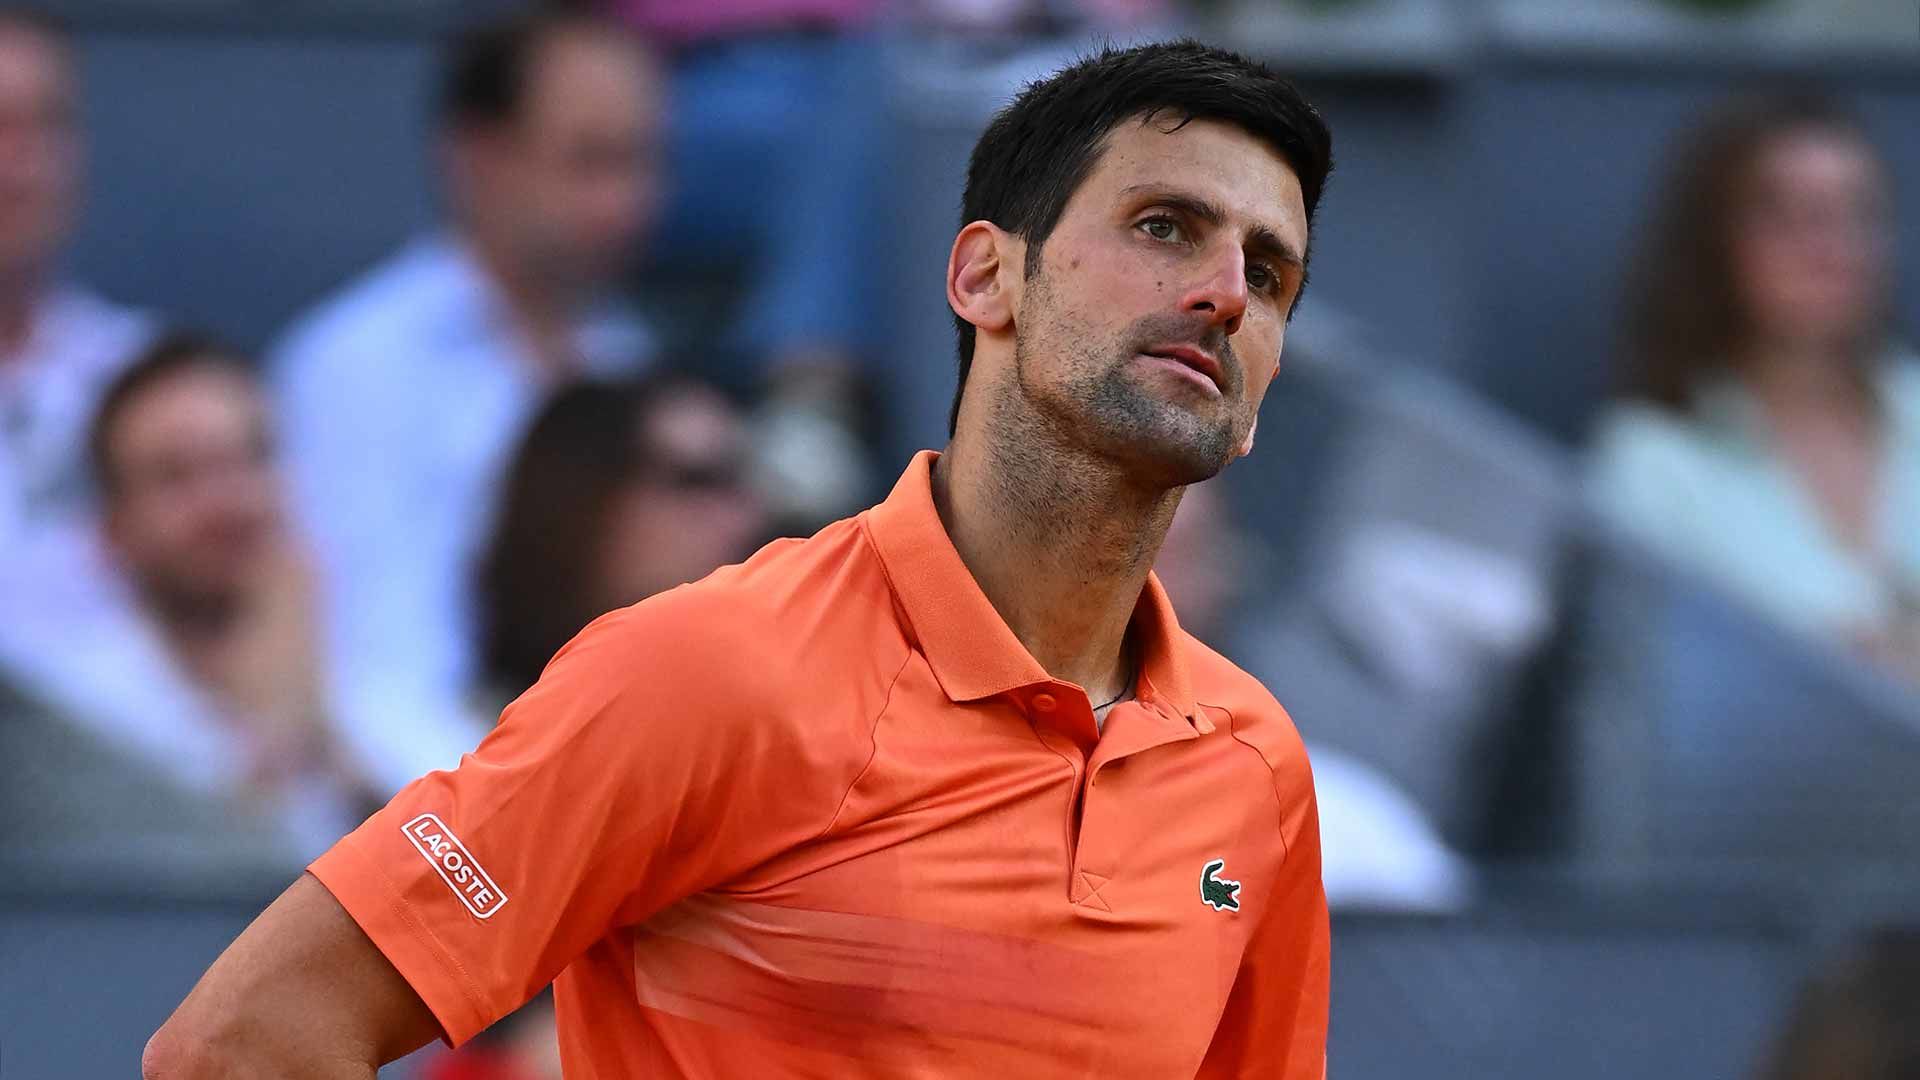 Djokovic surprised by Medvedev's refusal to continue the match